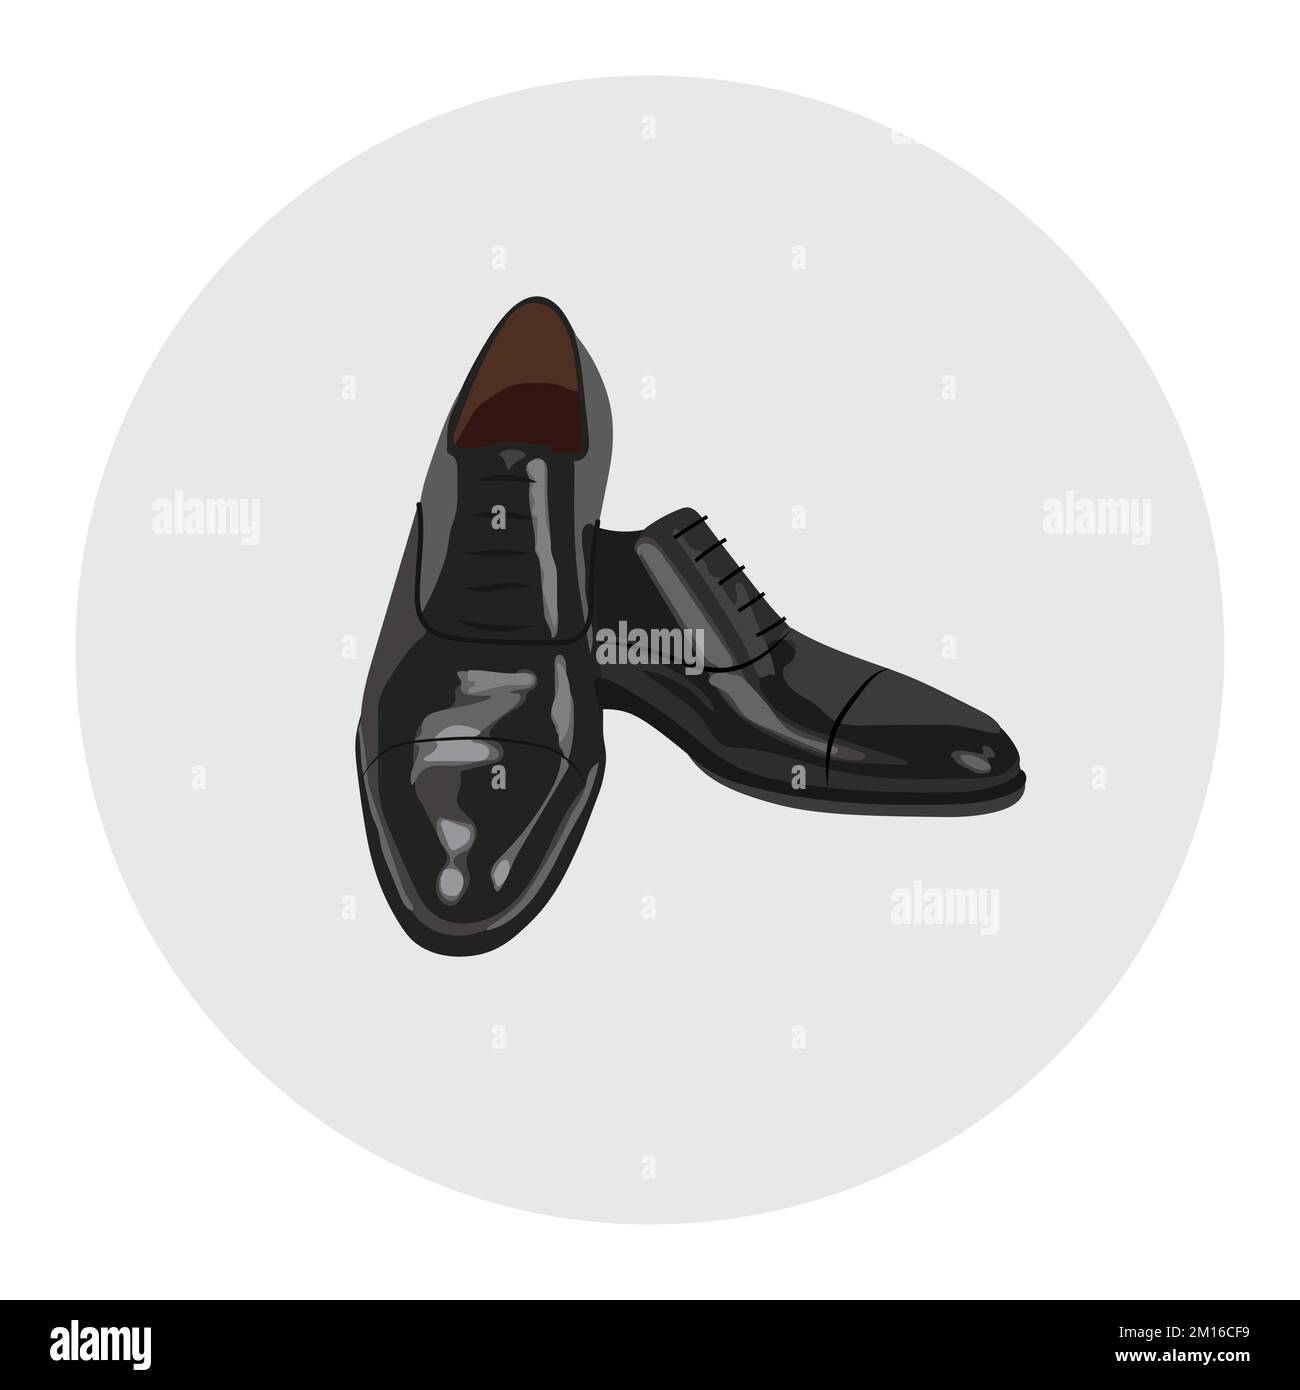 Stylish and fashionable men shoes on an interesting background, vector illustration Stock Vector